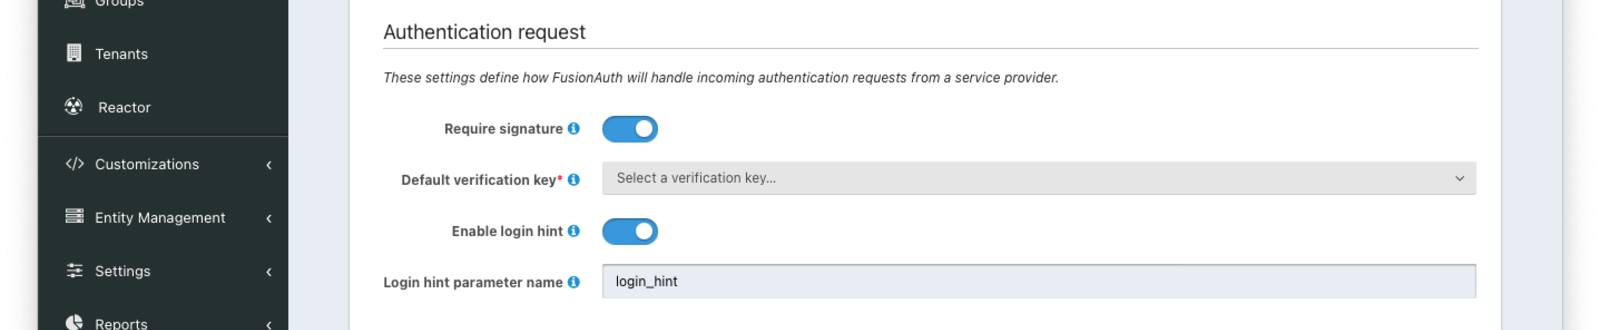 Application SAML authentication request settings